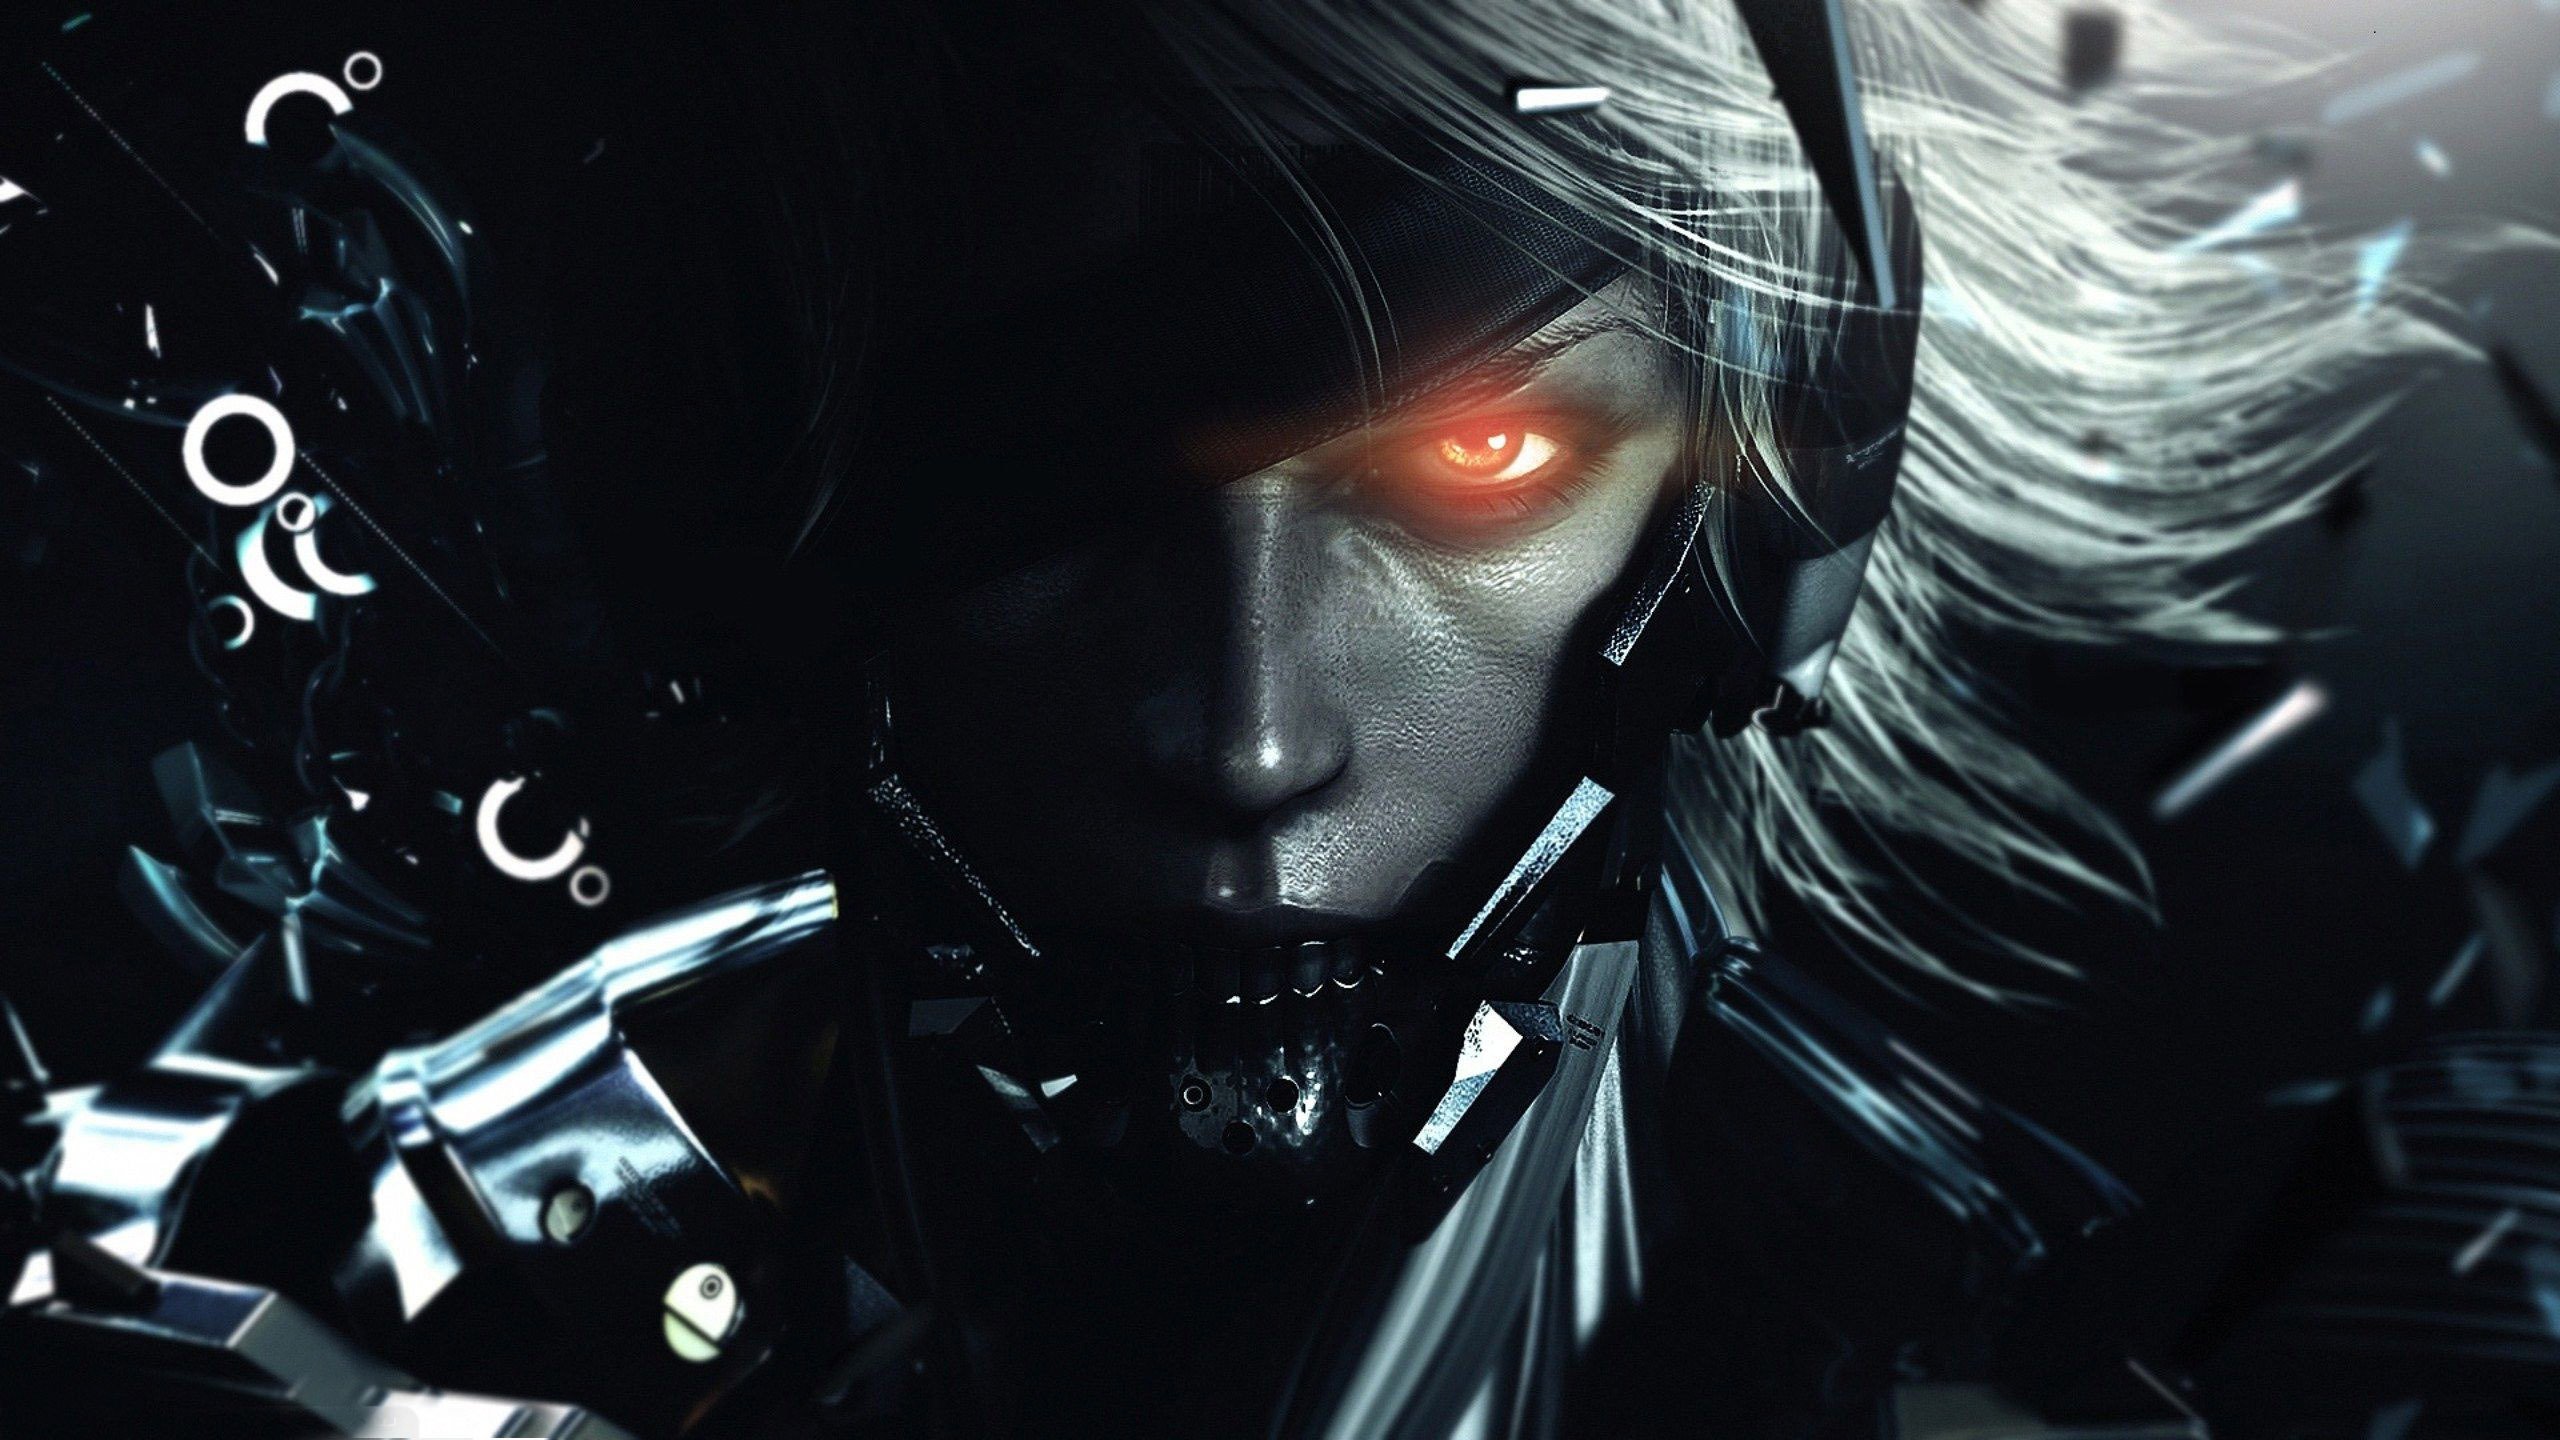 metal, Gear, Game, Action, Fighting, Military, Shooter, Tactical, Warrior, Video, Solid, Stealth, War, Sci fi, Futuristic, Science, Fiction, Technics, Rising, Revengeance, Raiden Wallpaper